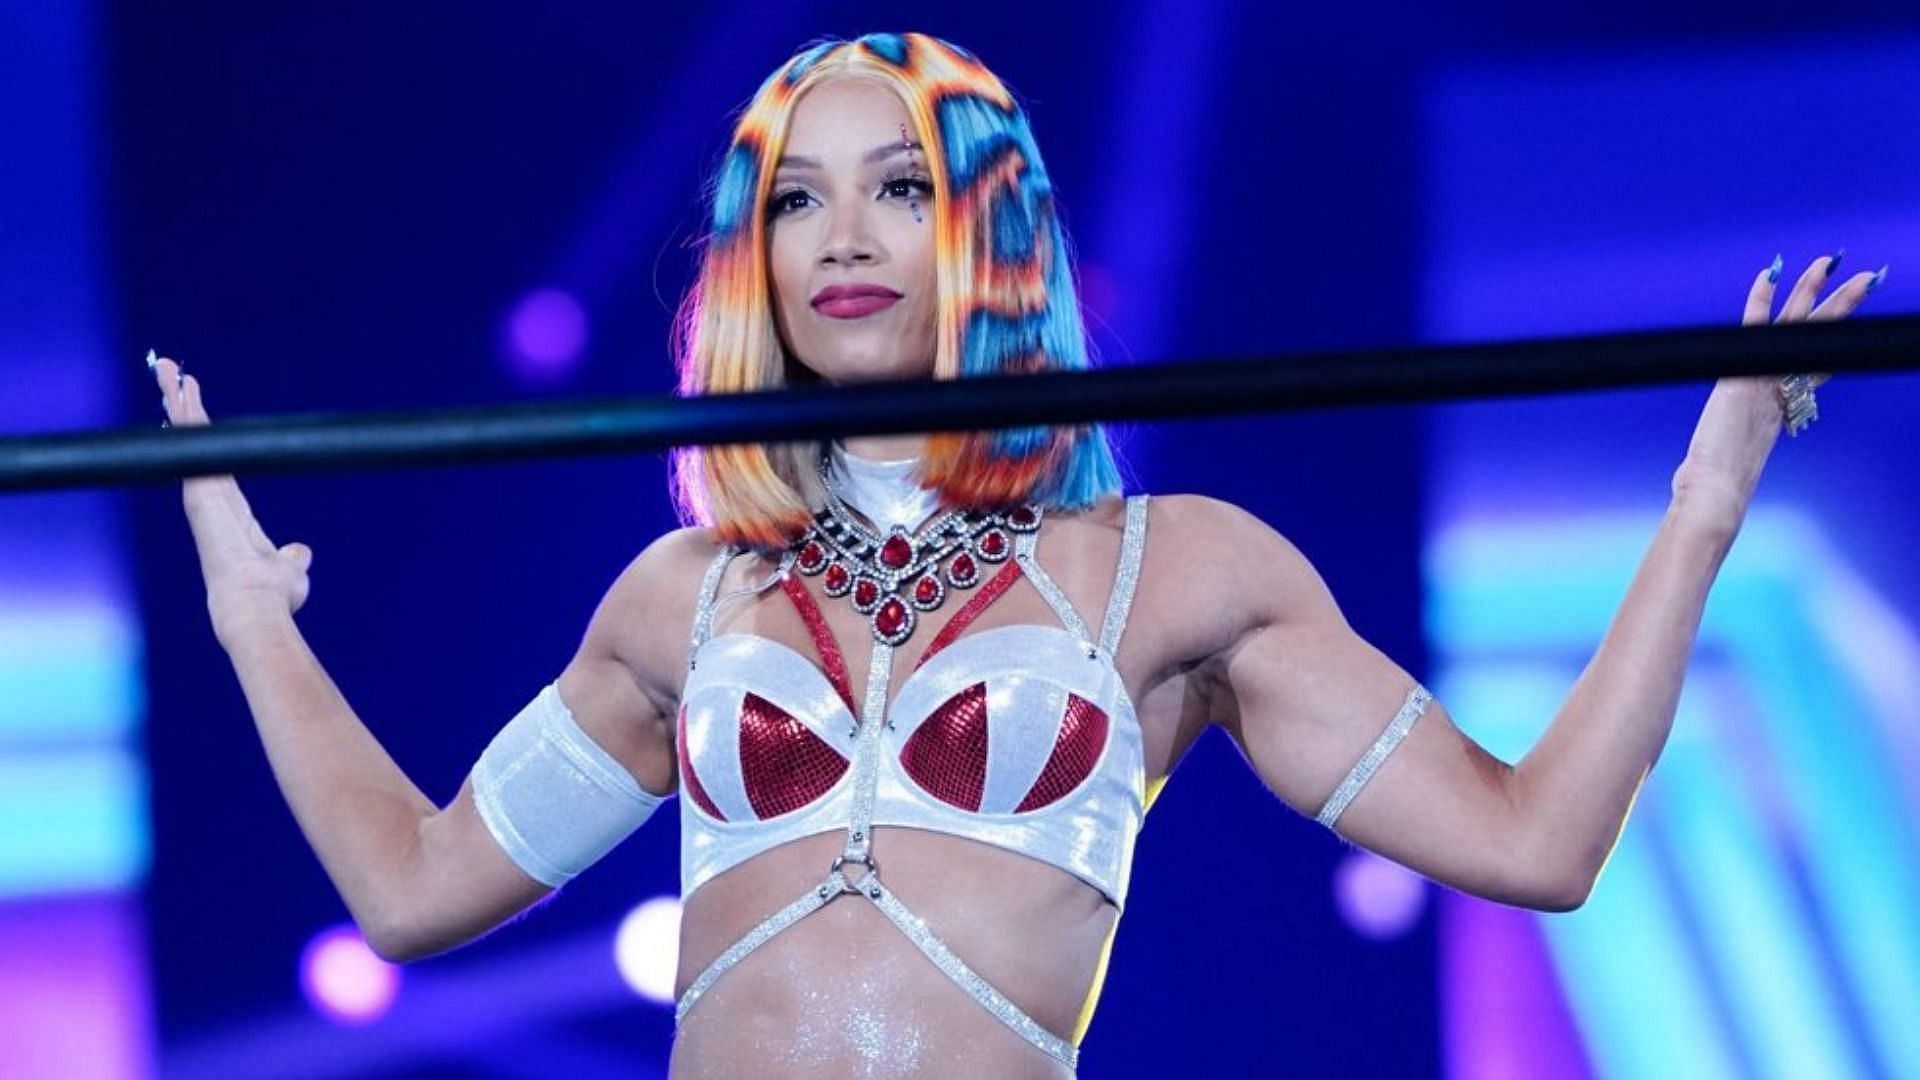 Mercedes Mone debuted for NJPW at WK17